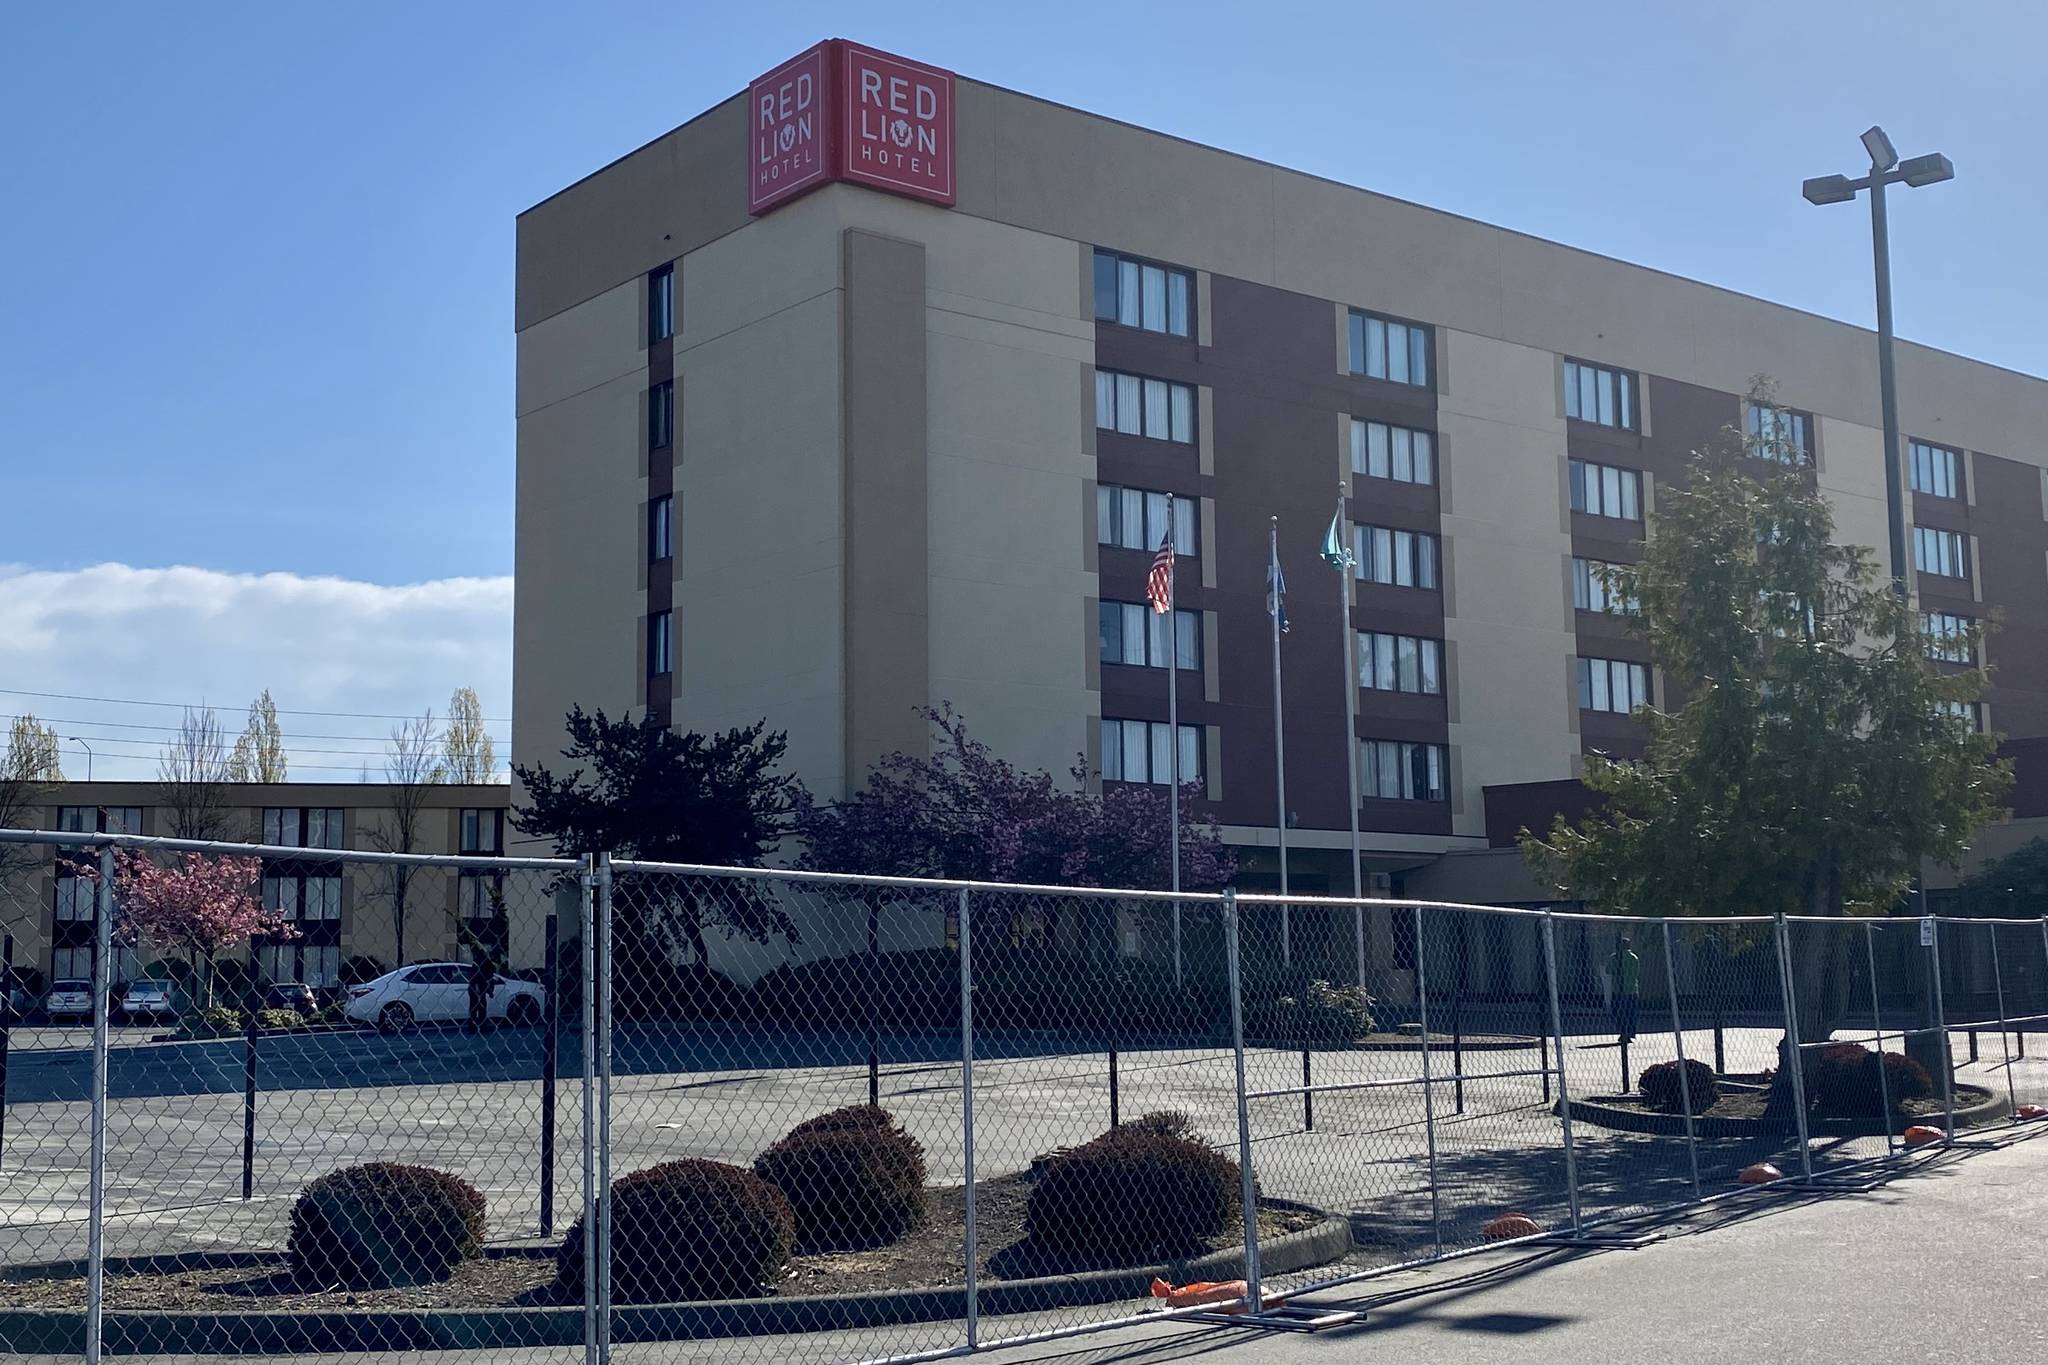 The Red Lion Inn at 1 South Grady Way in Renton is being used as temporary site to relocate individuals experiencing homelessness during the COVID-19 pandemic. Olivia Sullivan/staff photo.